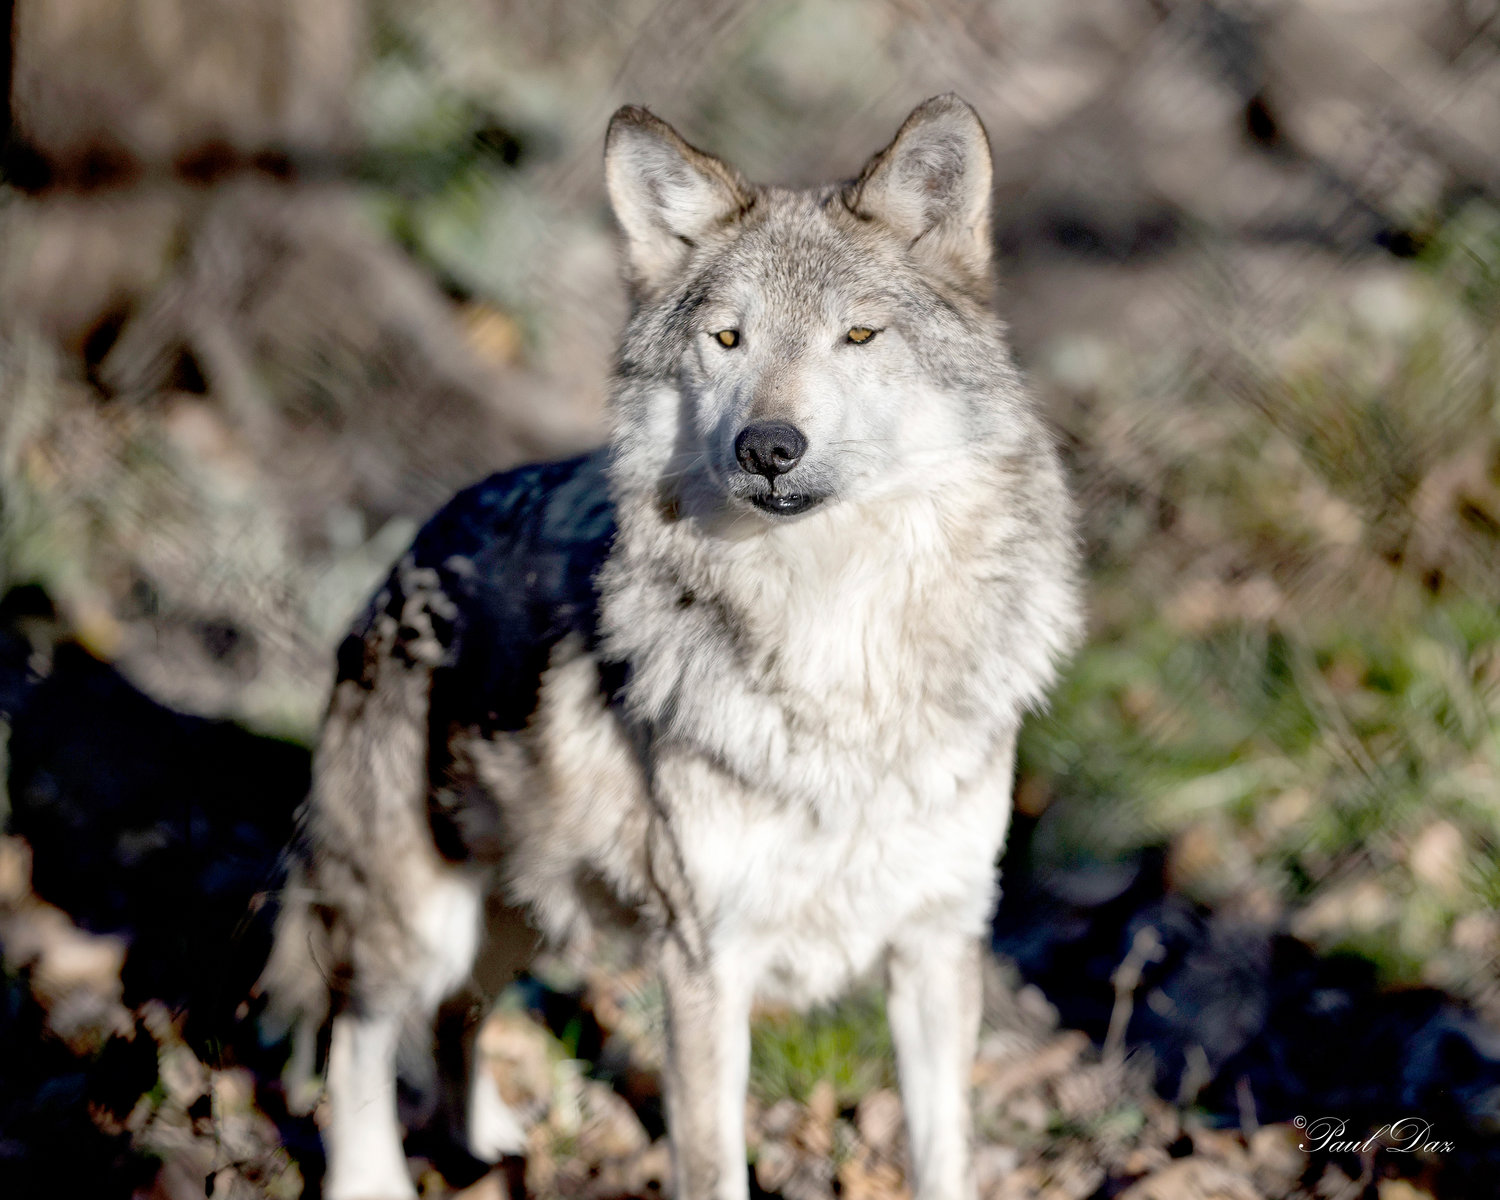 The Utica Zoo invites the public to enjoy nature at night, including such nocturnal creatures as a wolf, during the organization’s upcoming Night Prowl event on Friday, Feb. 17.